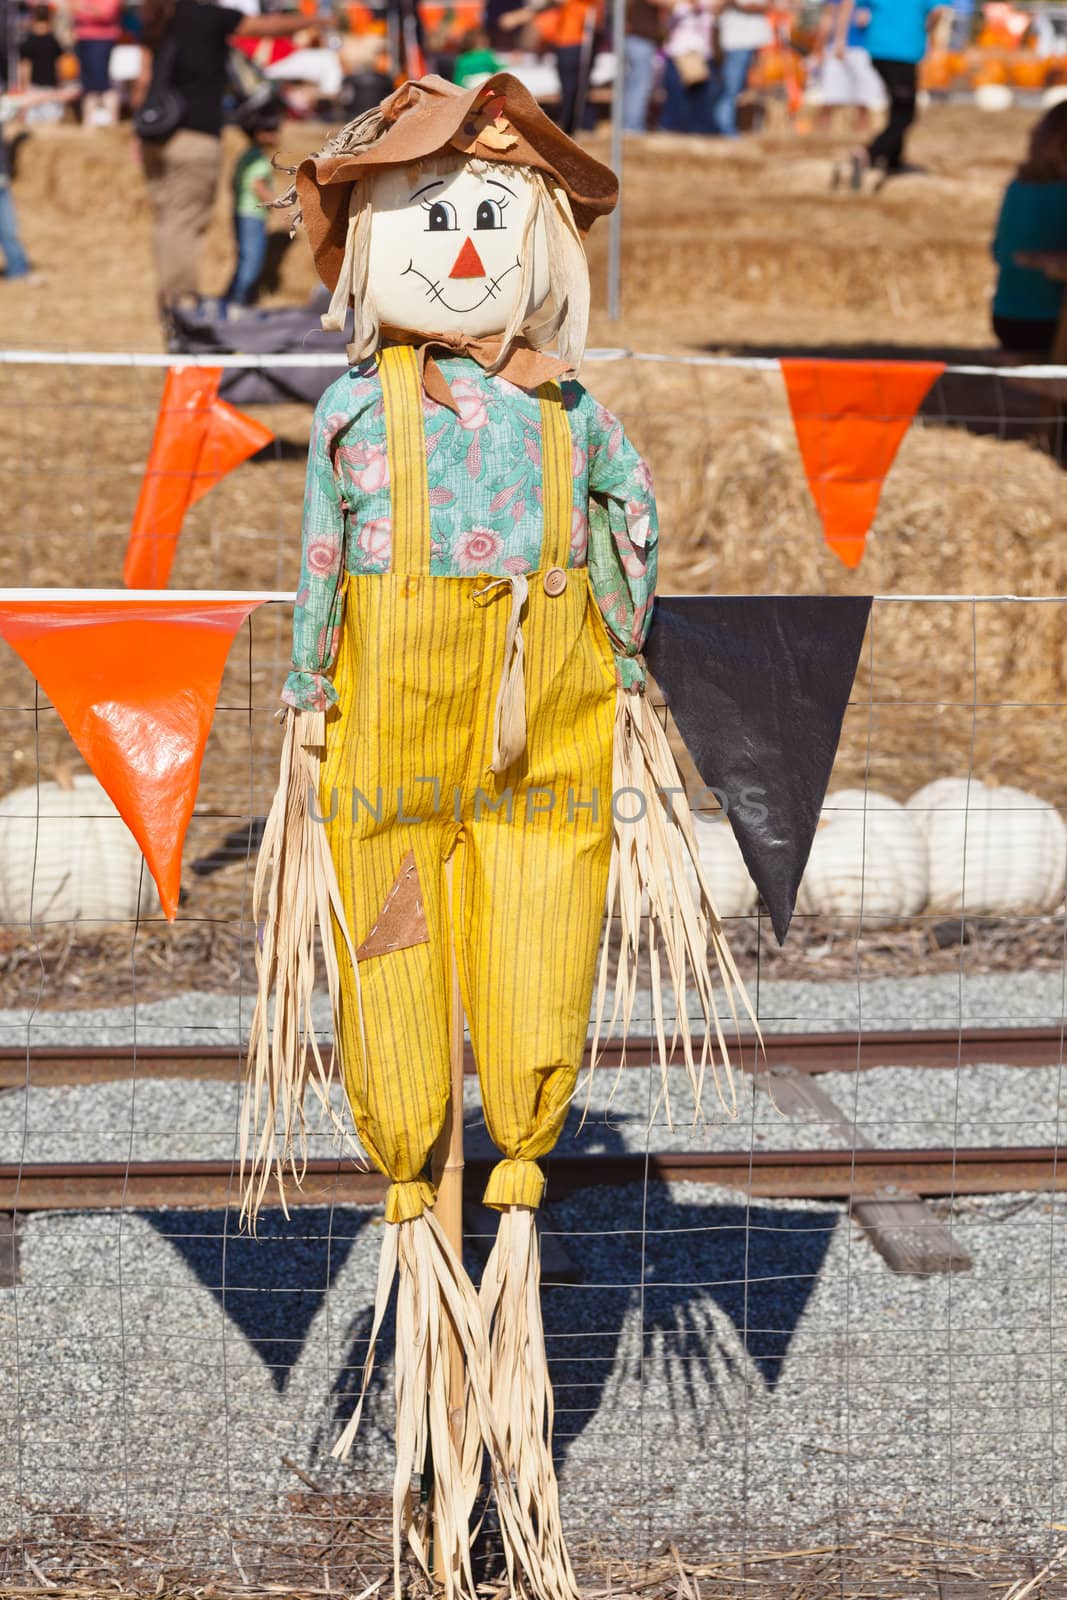 Scarecrow is a human figure dressed in old clothes and placed in fields by farmers to discourage birds disturbing and feeding on recently cast seed and growing crops.